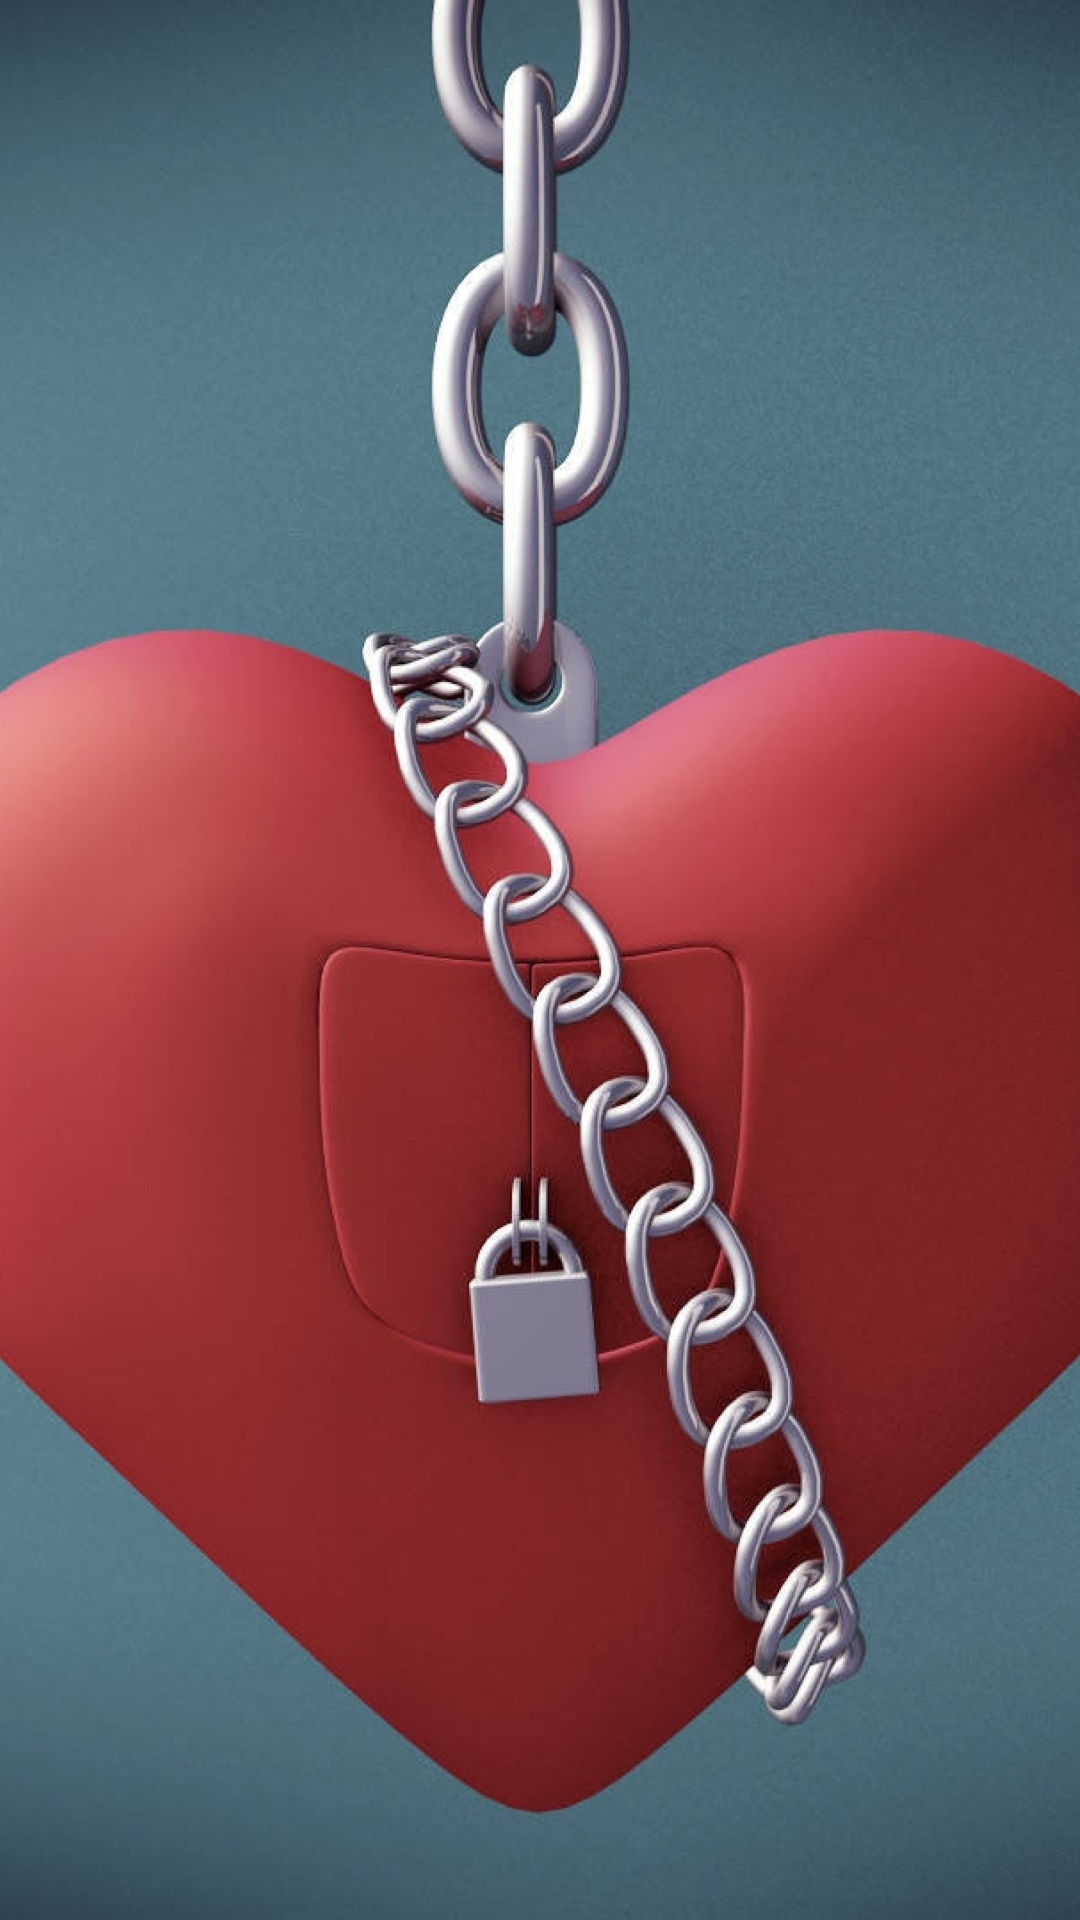 Heart with lock wallpaper 1080x1920